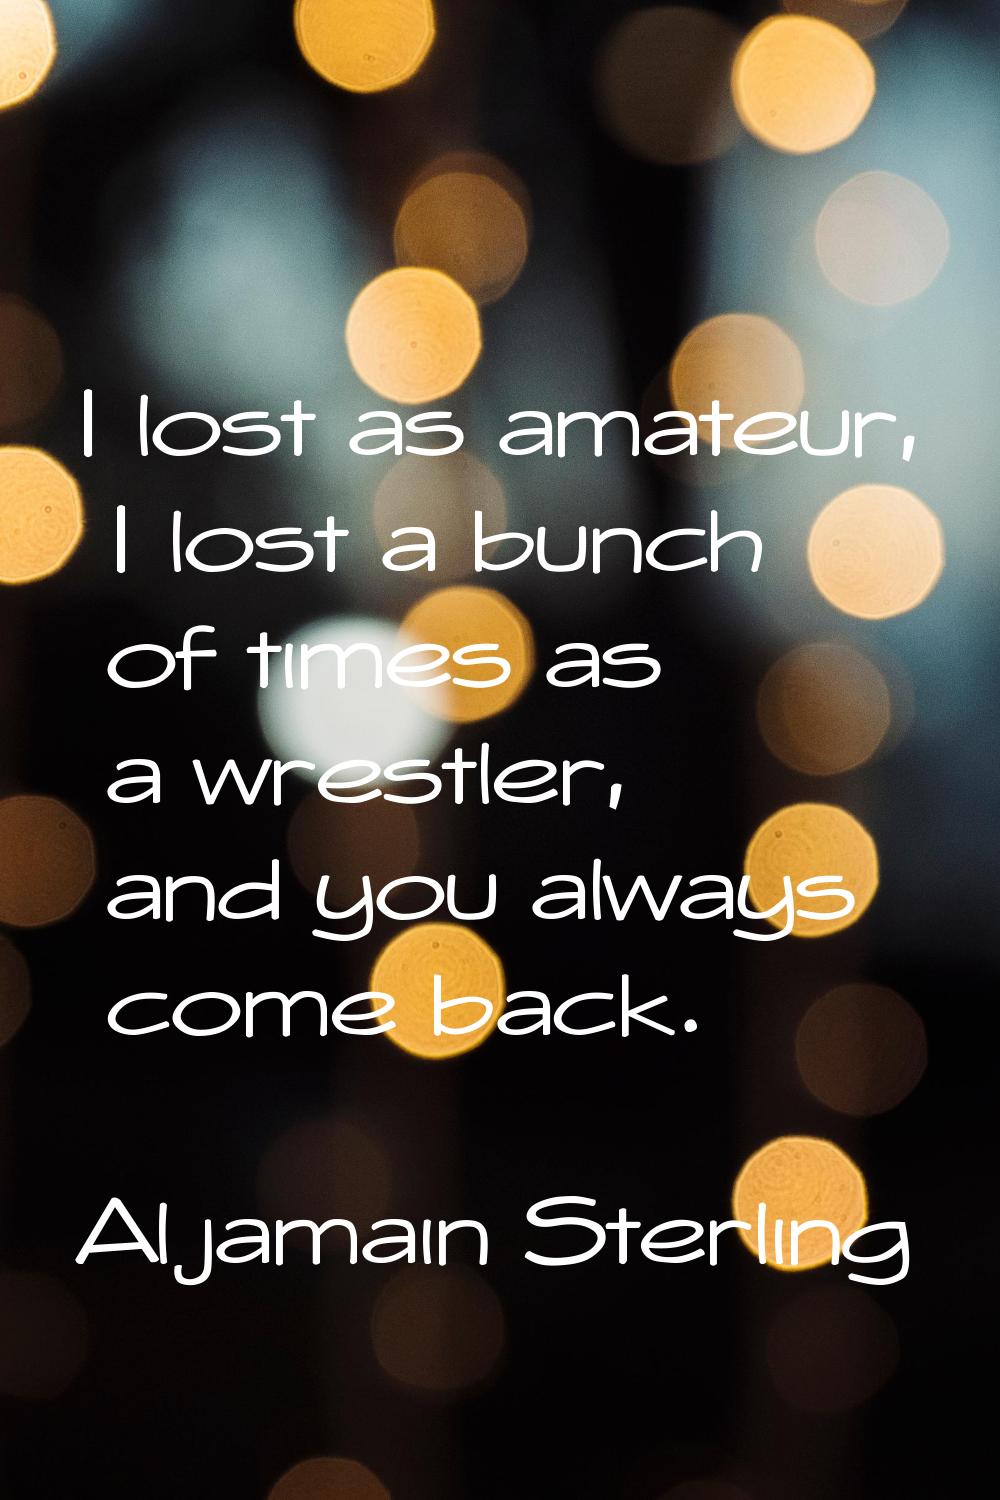 I lost as amateur, I lost a bunch of times as a wrestler, and you always come back.